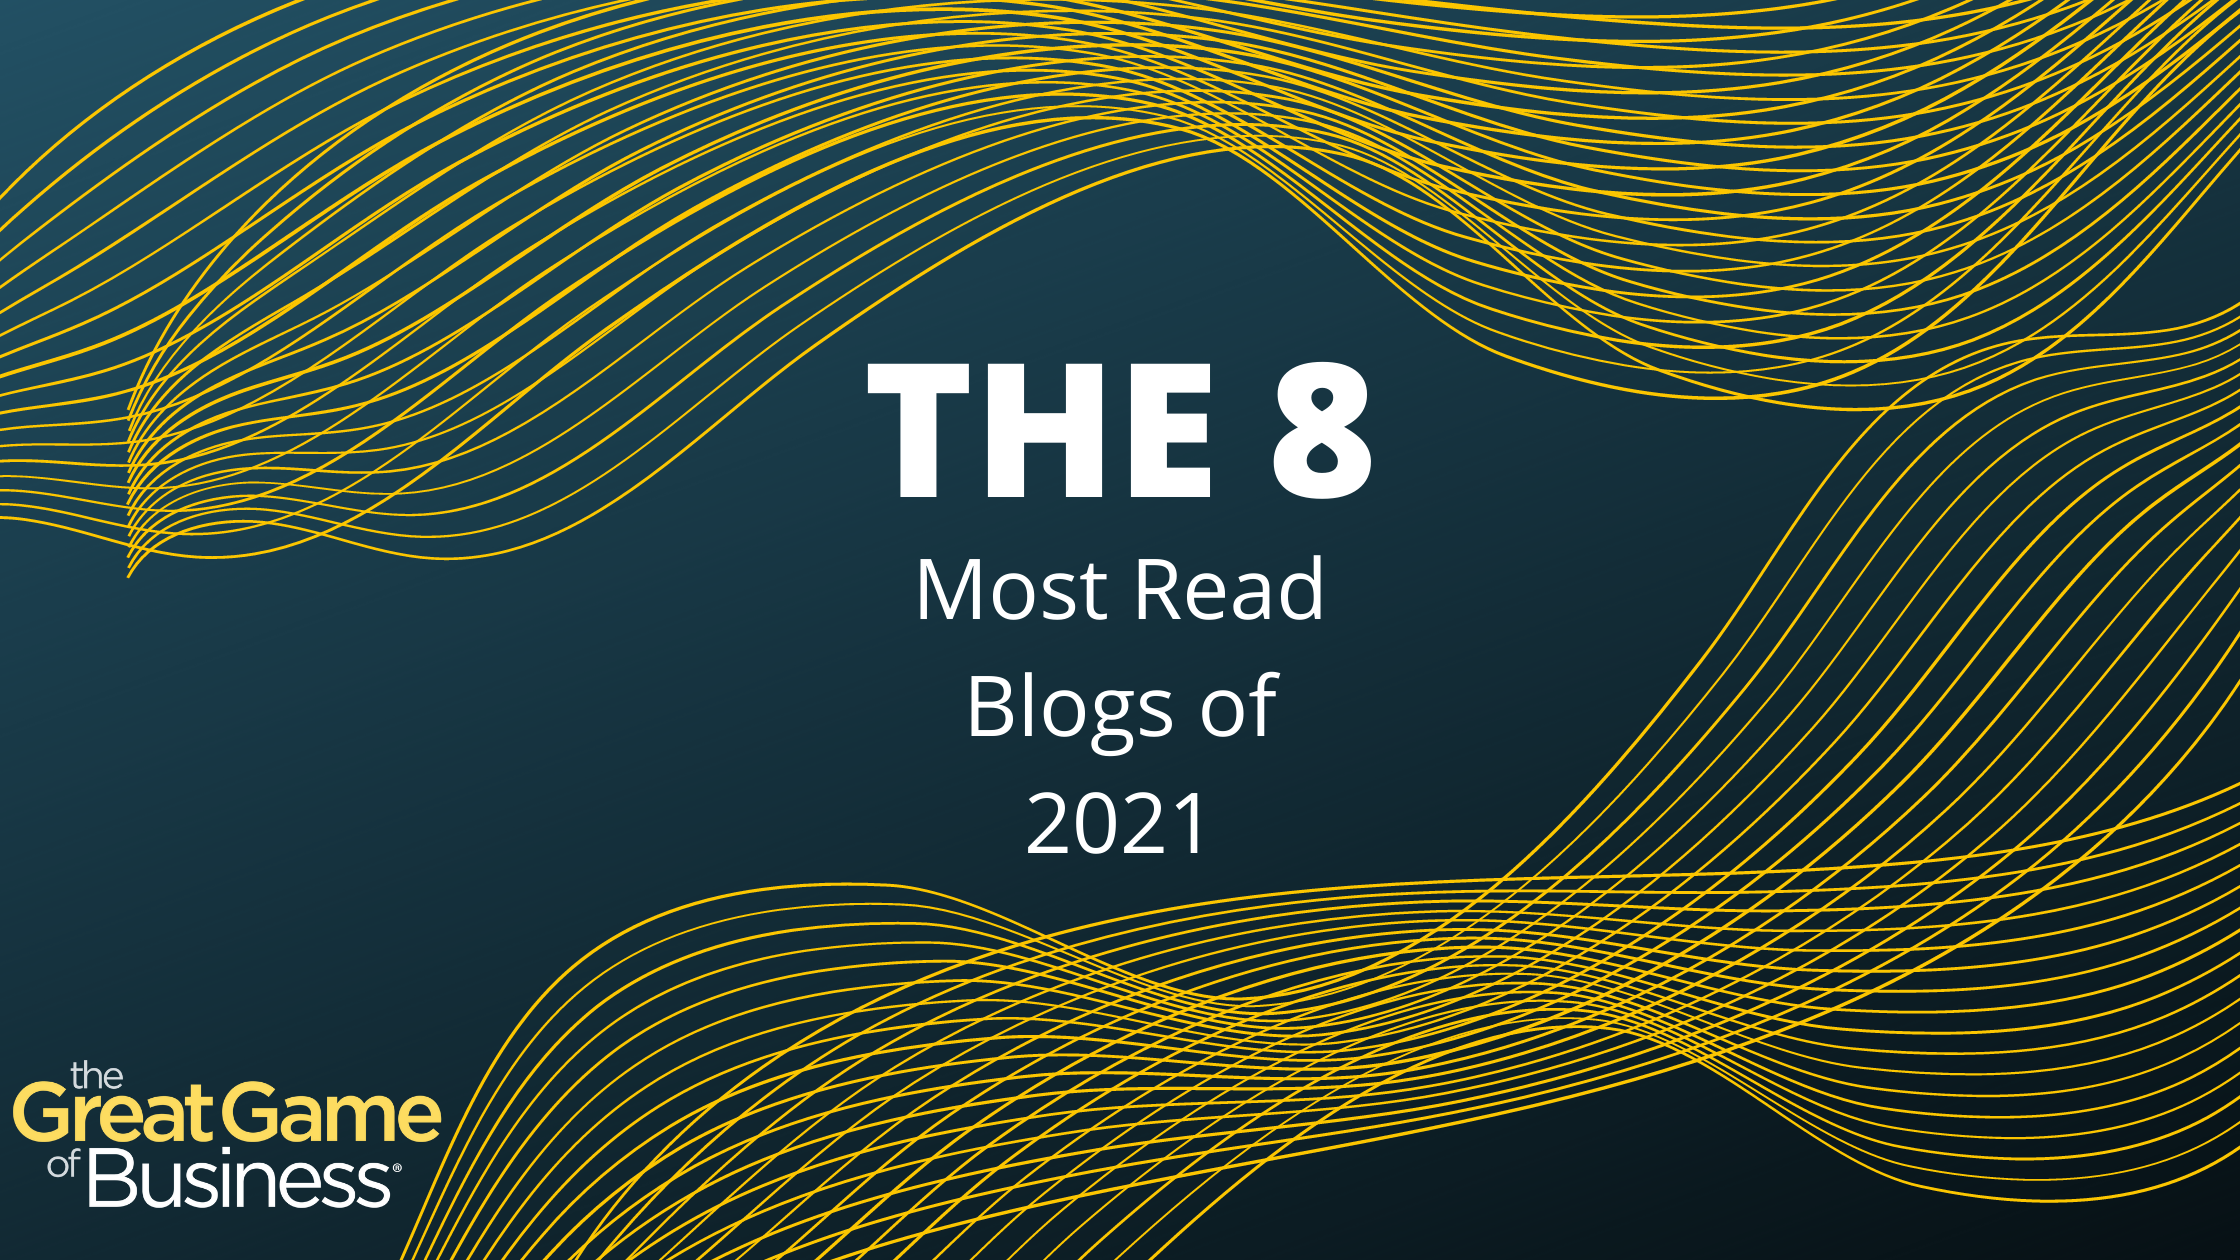 The 8 Most Read Blogs of 2021